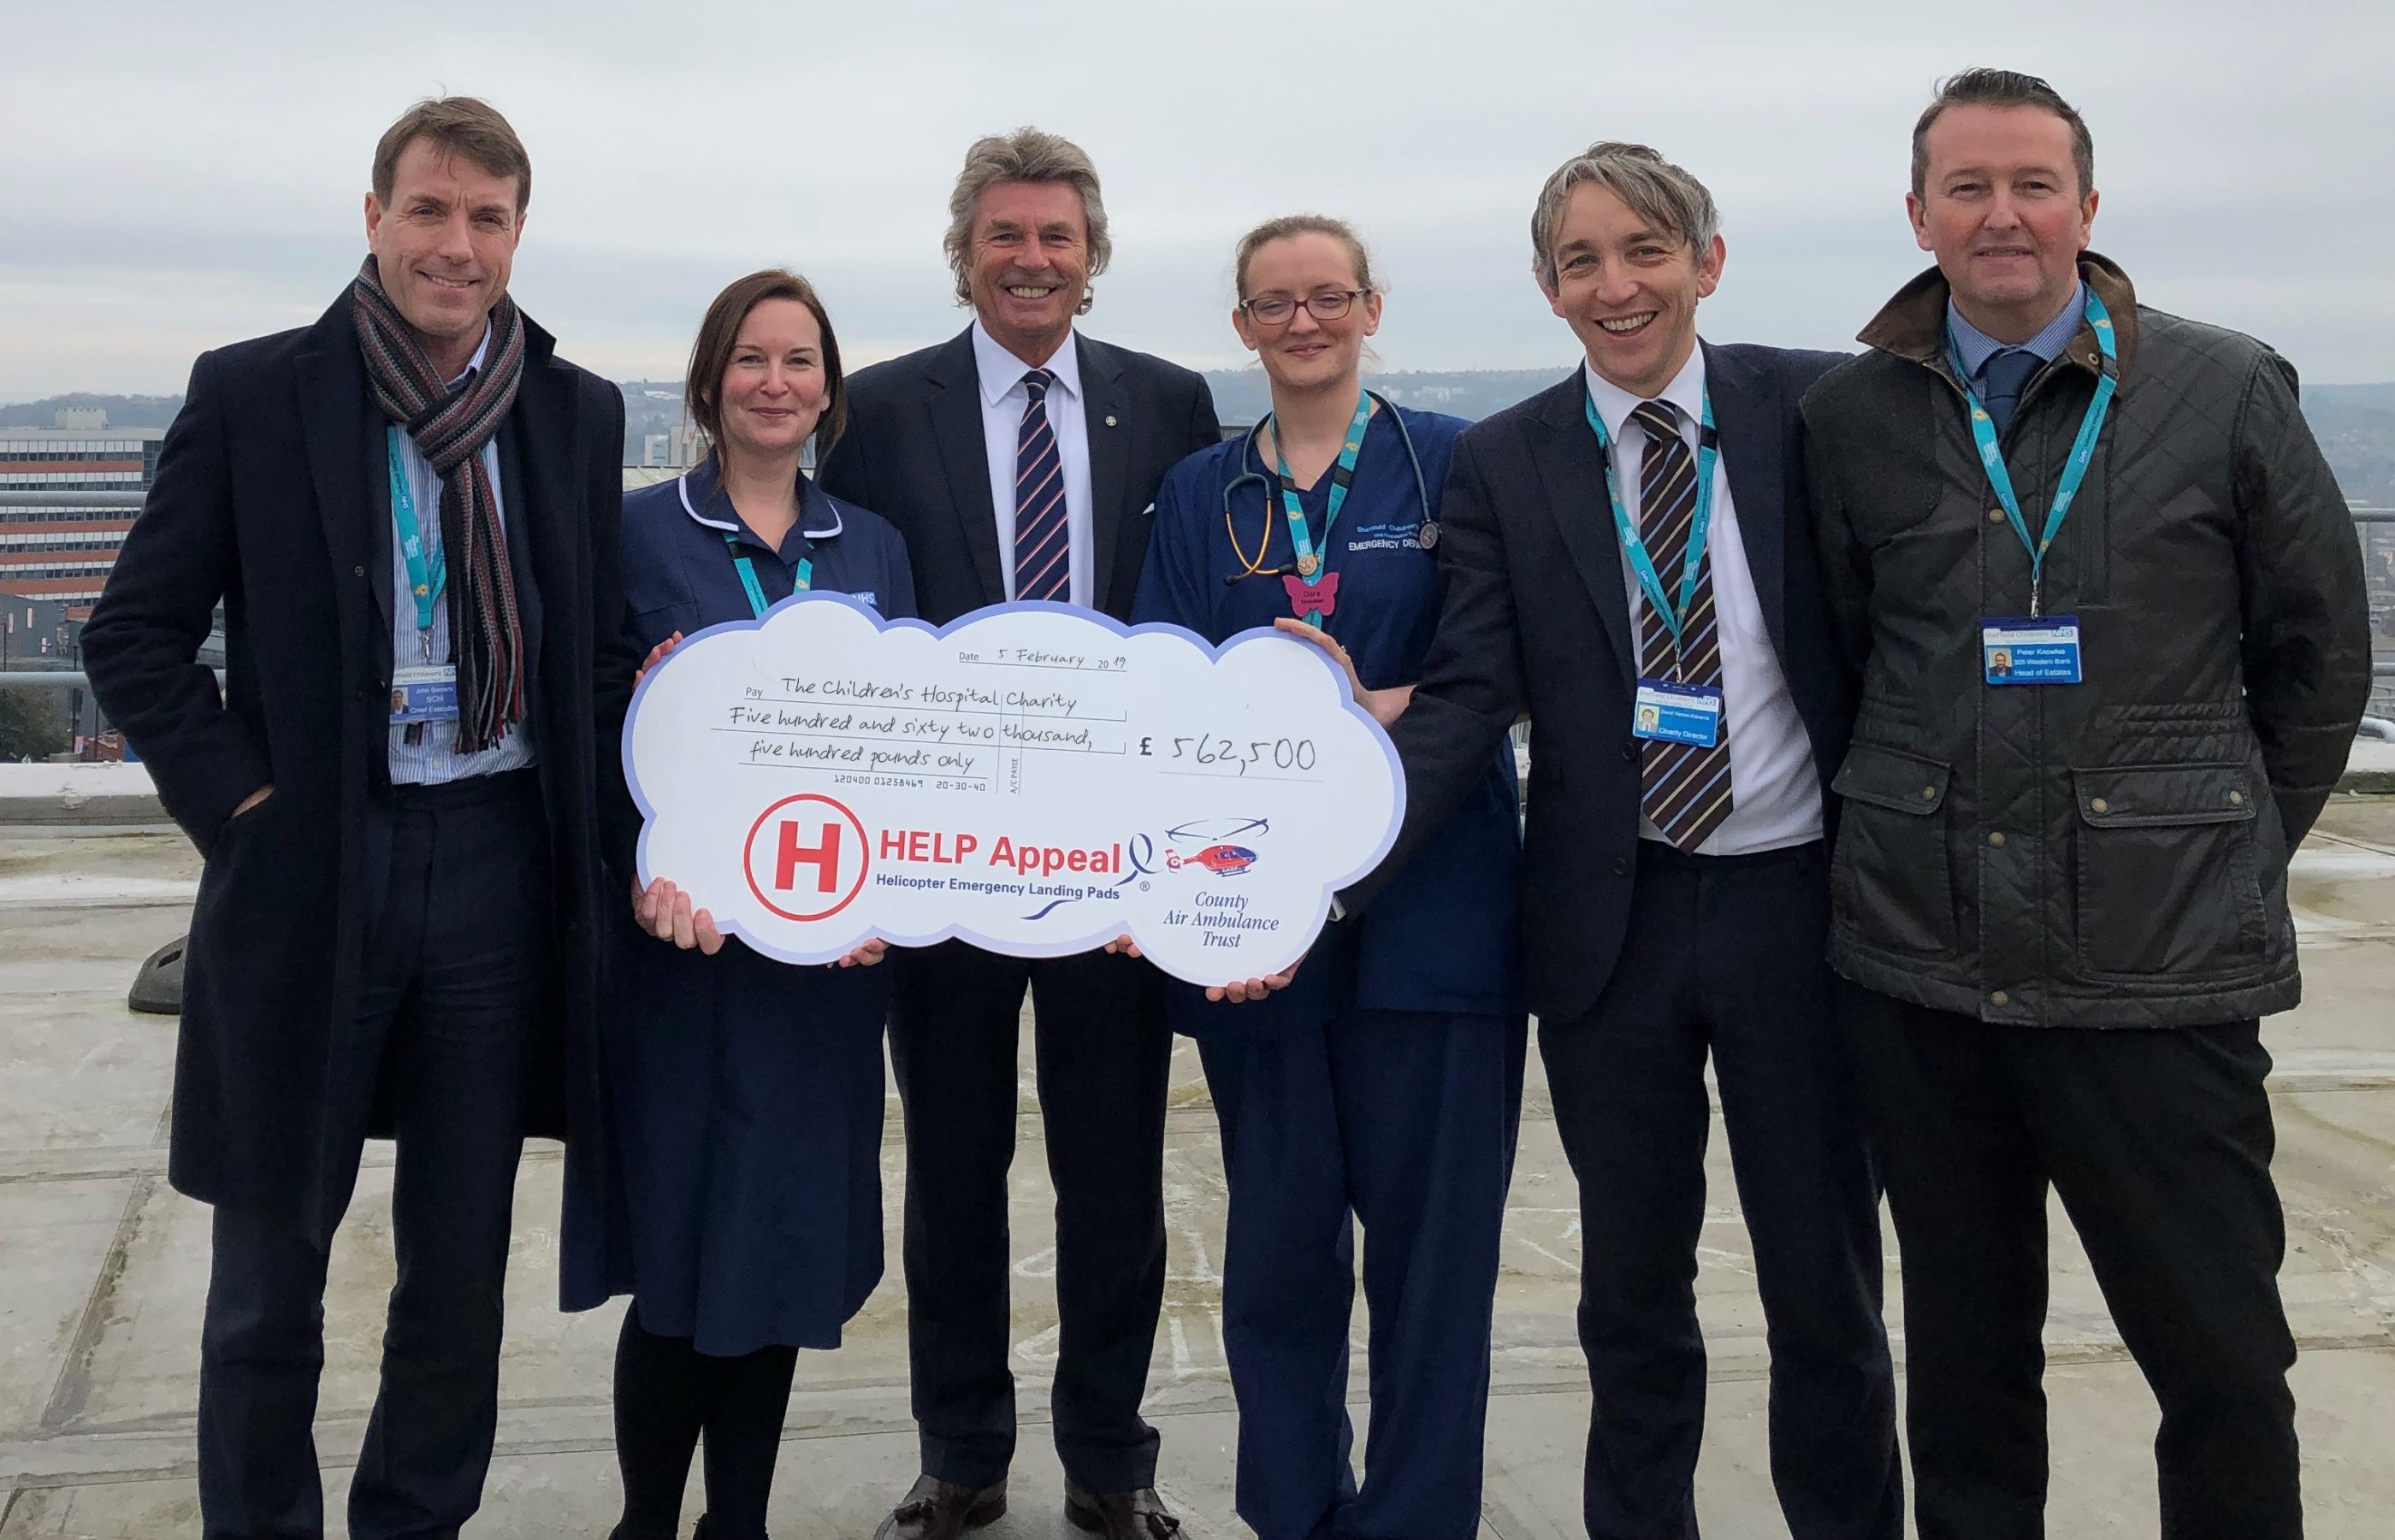 From left: John Somers, chief executive officer of Sheffield Children’s NHS Foundation Trust; Nicola Anderson, trauma nurse coordinator at Sheffield Children’s Hospital; Robert Bertram, CEO of the HELP Appeal; Dr. Clare O’Connell, consultant in emergency medicine and major trauma lead at Sheffield Children’s Hospital; David Vernon-Edwards, director at The Children’s Hospital Charity; and Peter Knowles, head of estates at Sheffield Children’s NHS Foundation Trust. HELP Appeal Photo